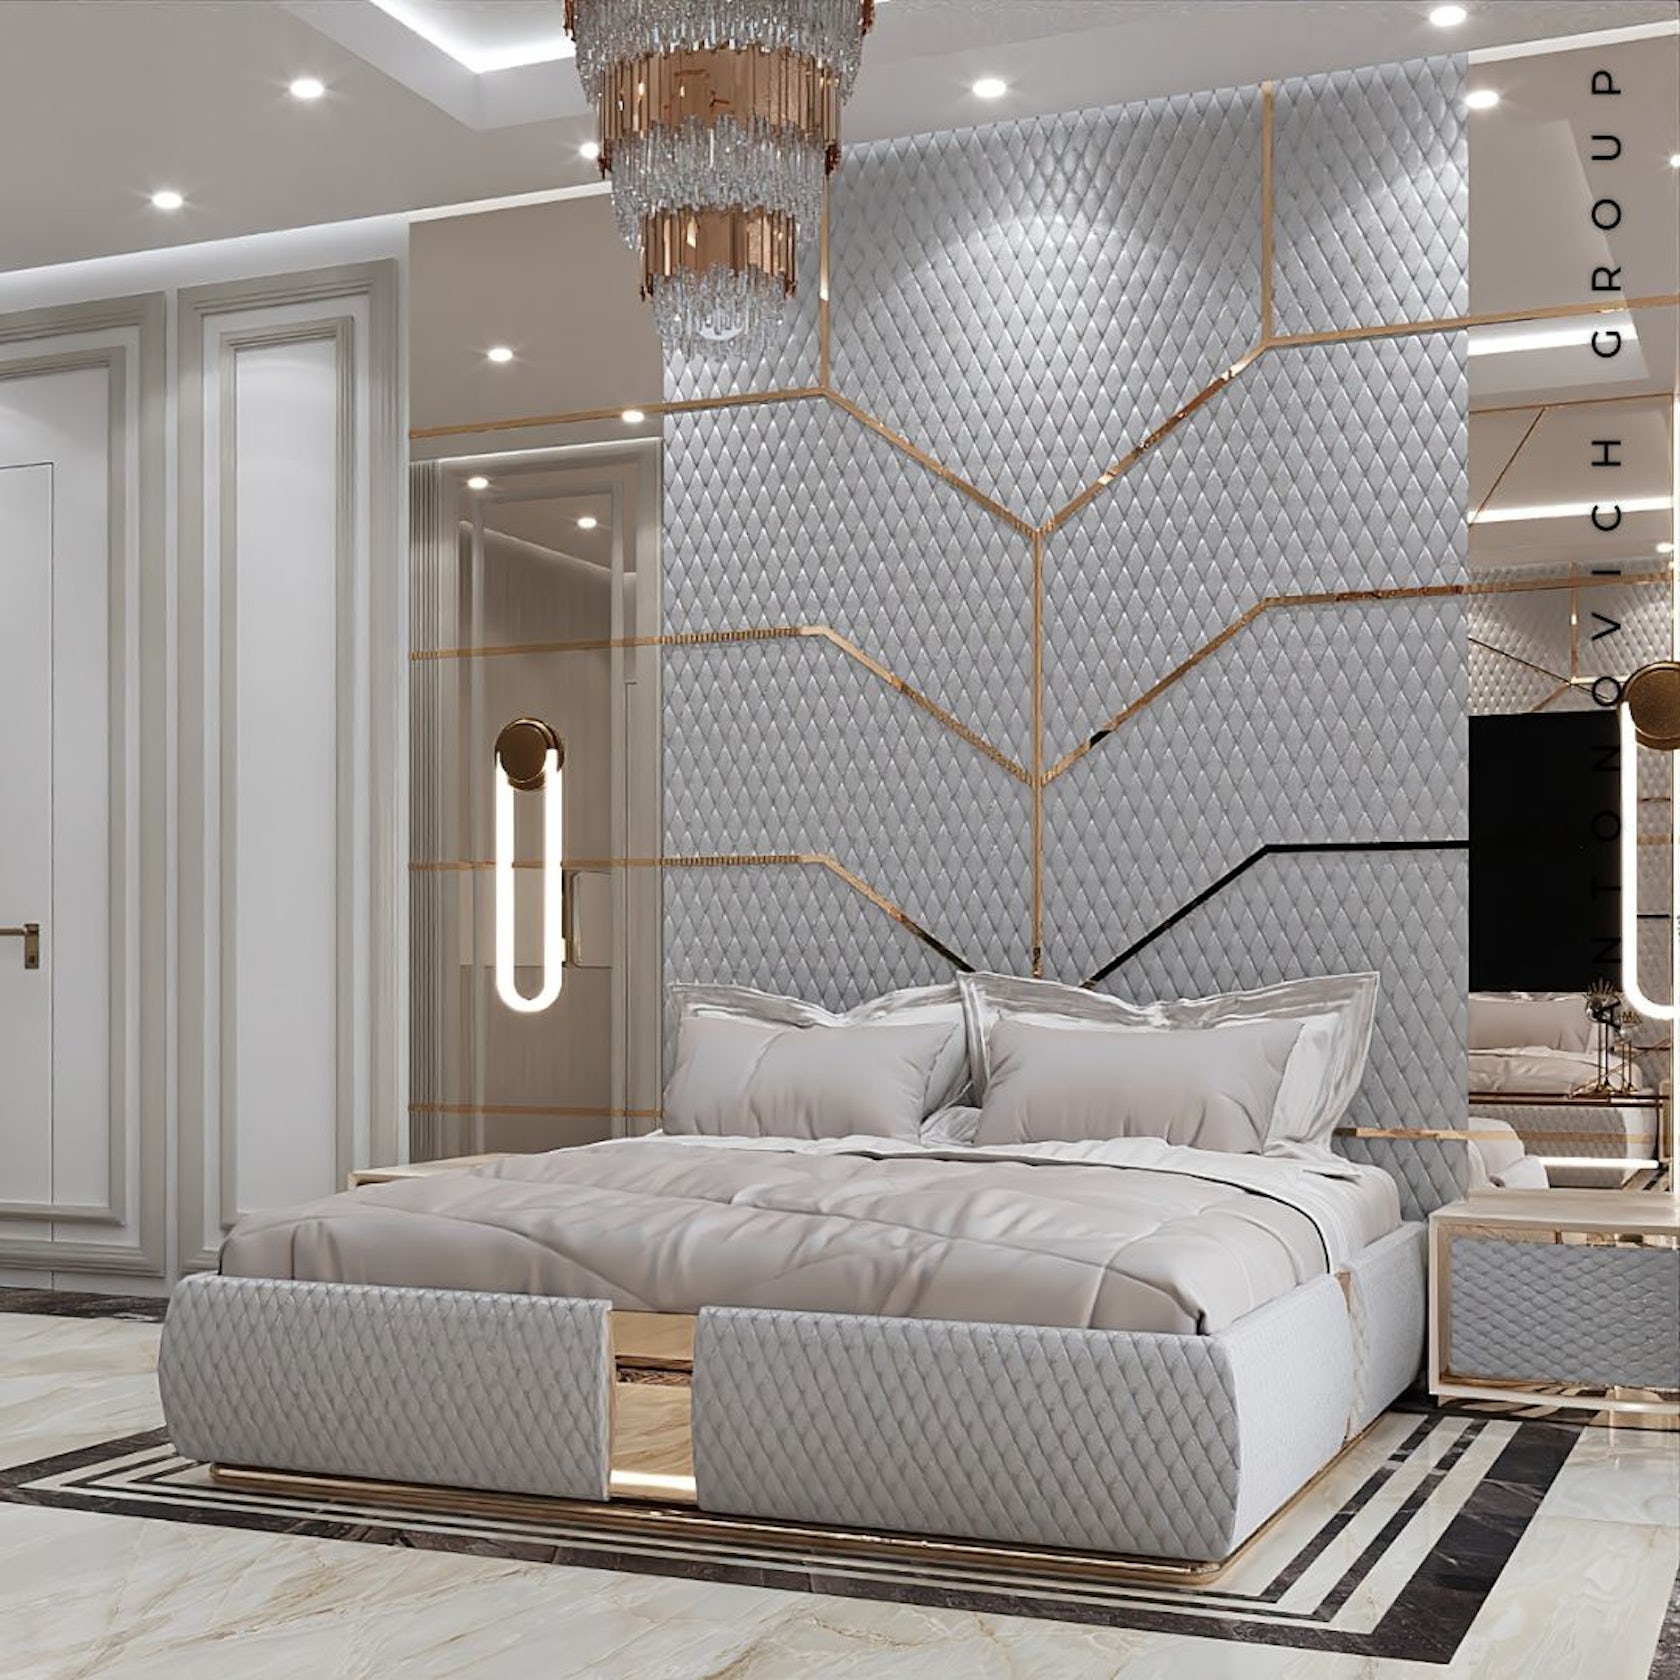 Luxury Bedroom Interior Design And Furniture Production By Luxury